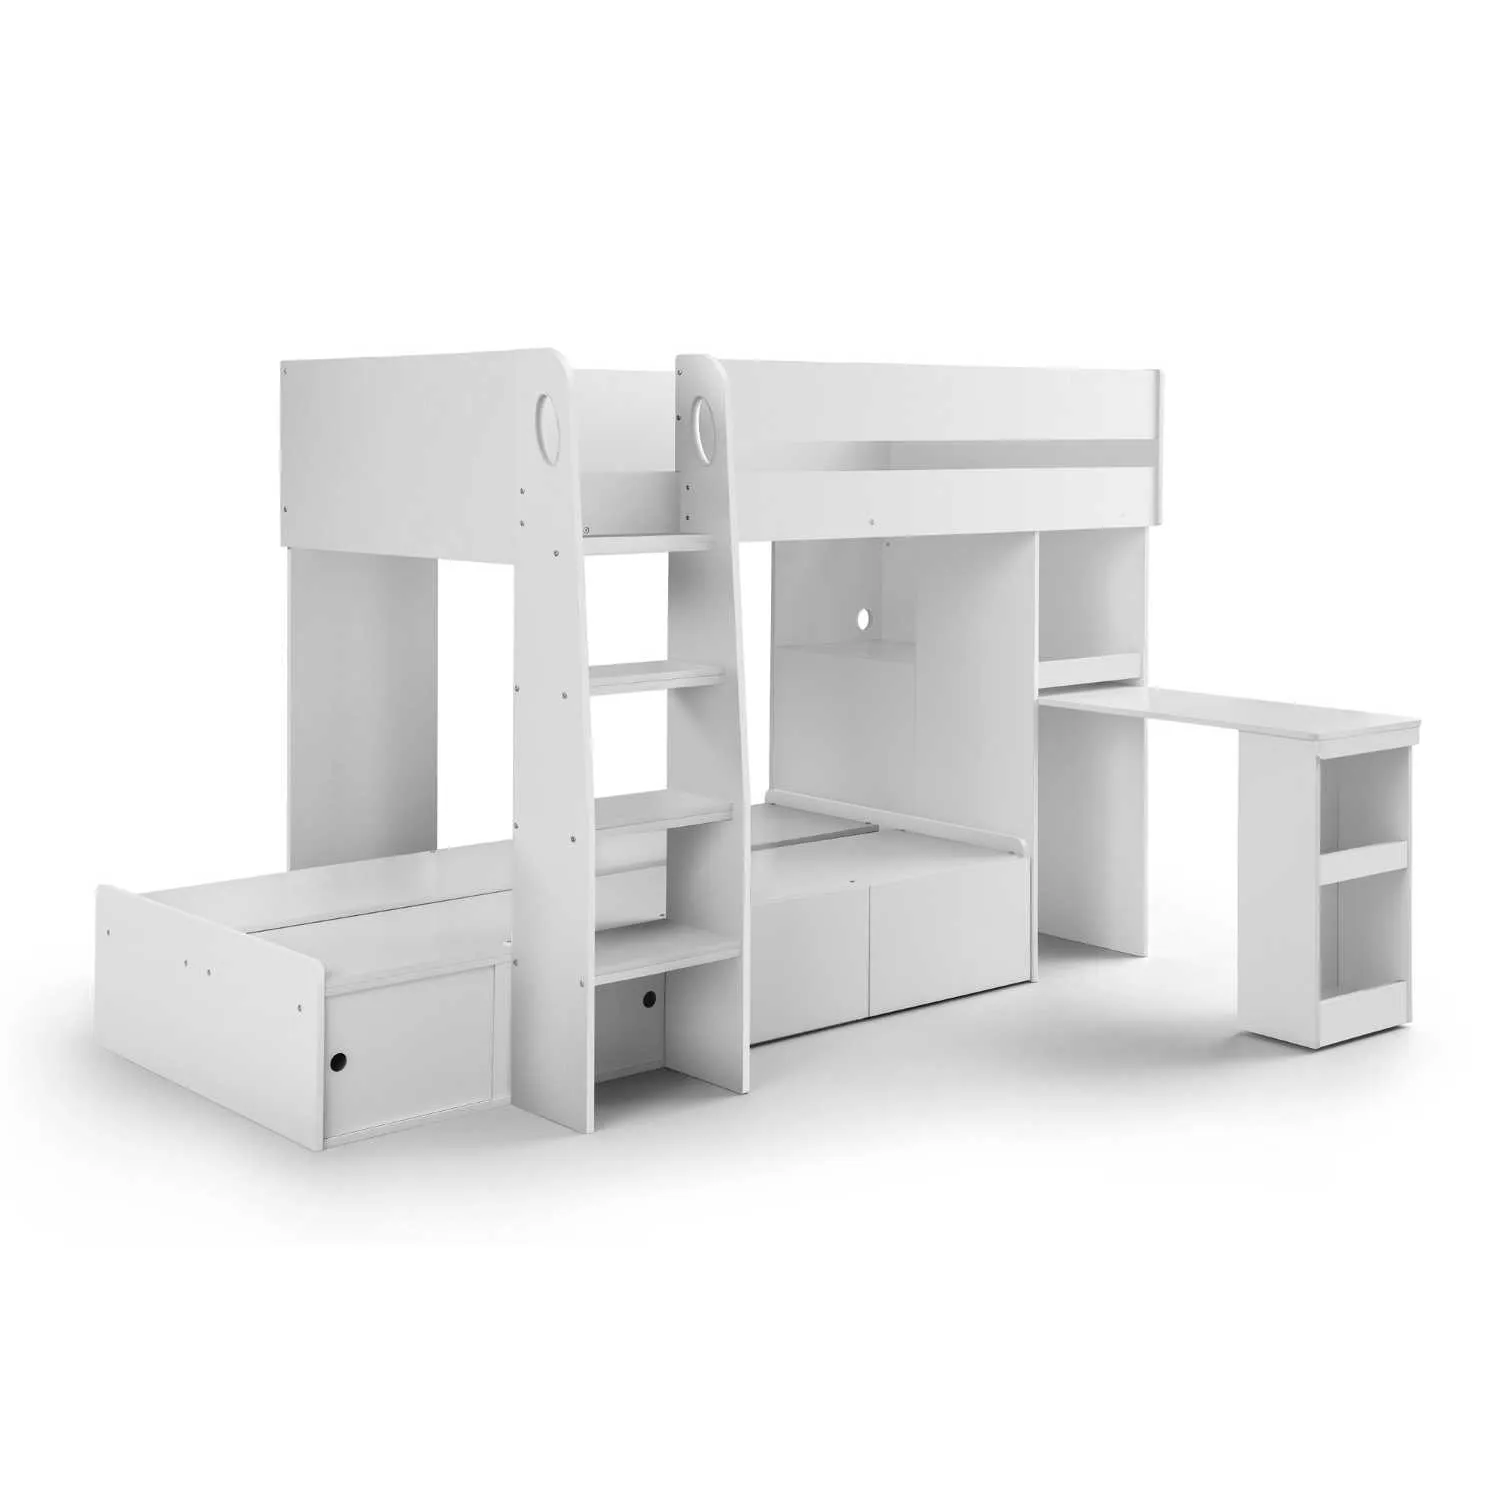 Eclipse Bunk Bed White